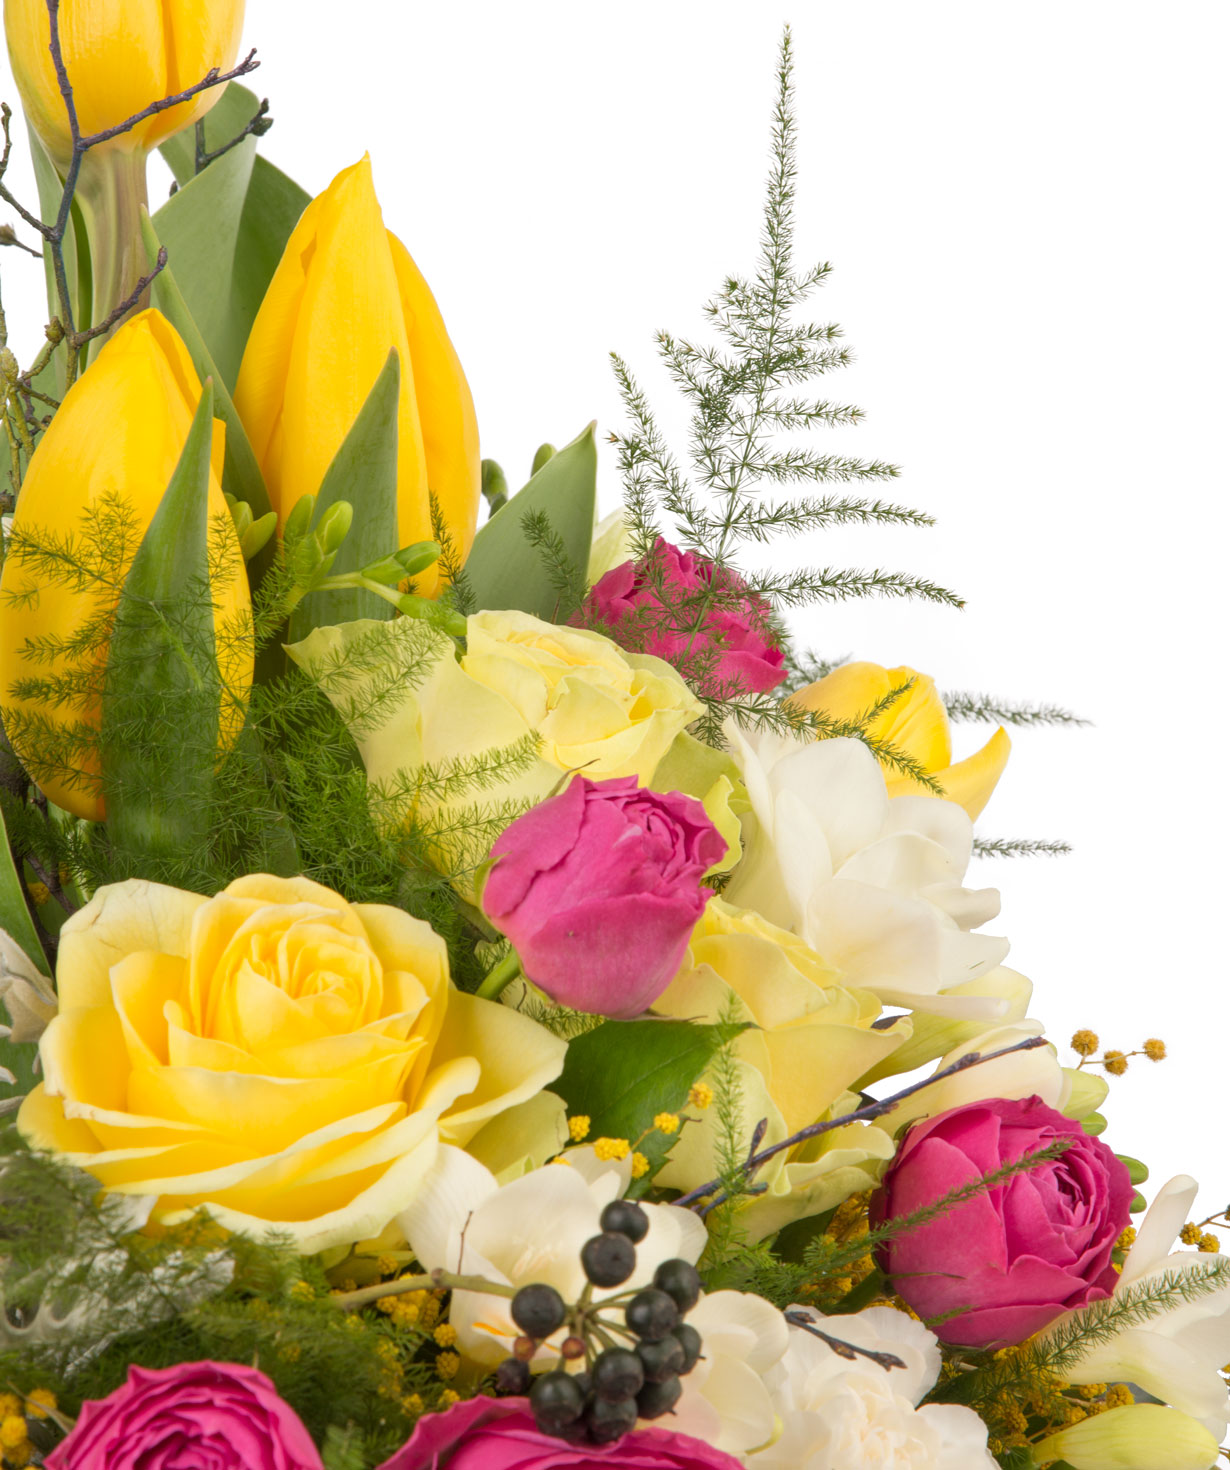 Composition `Jonava` with roses, tulips and freesias